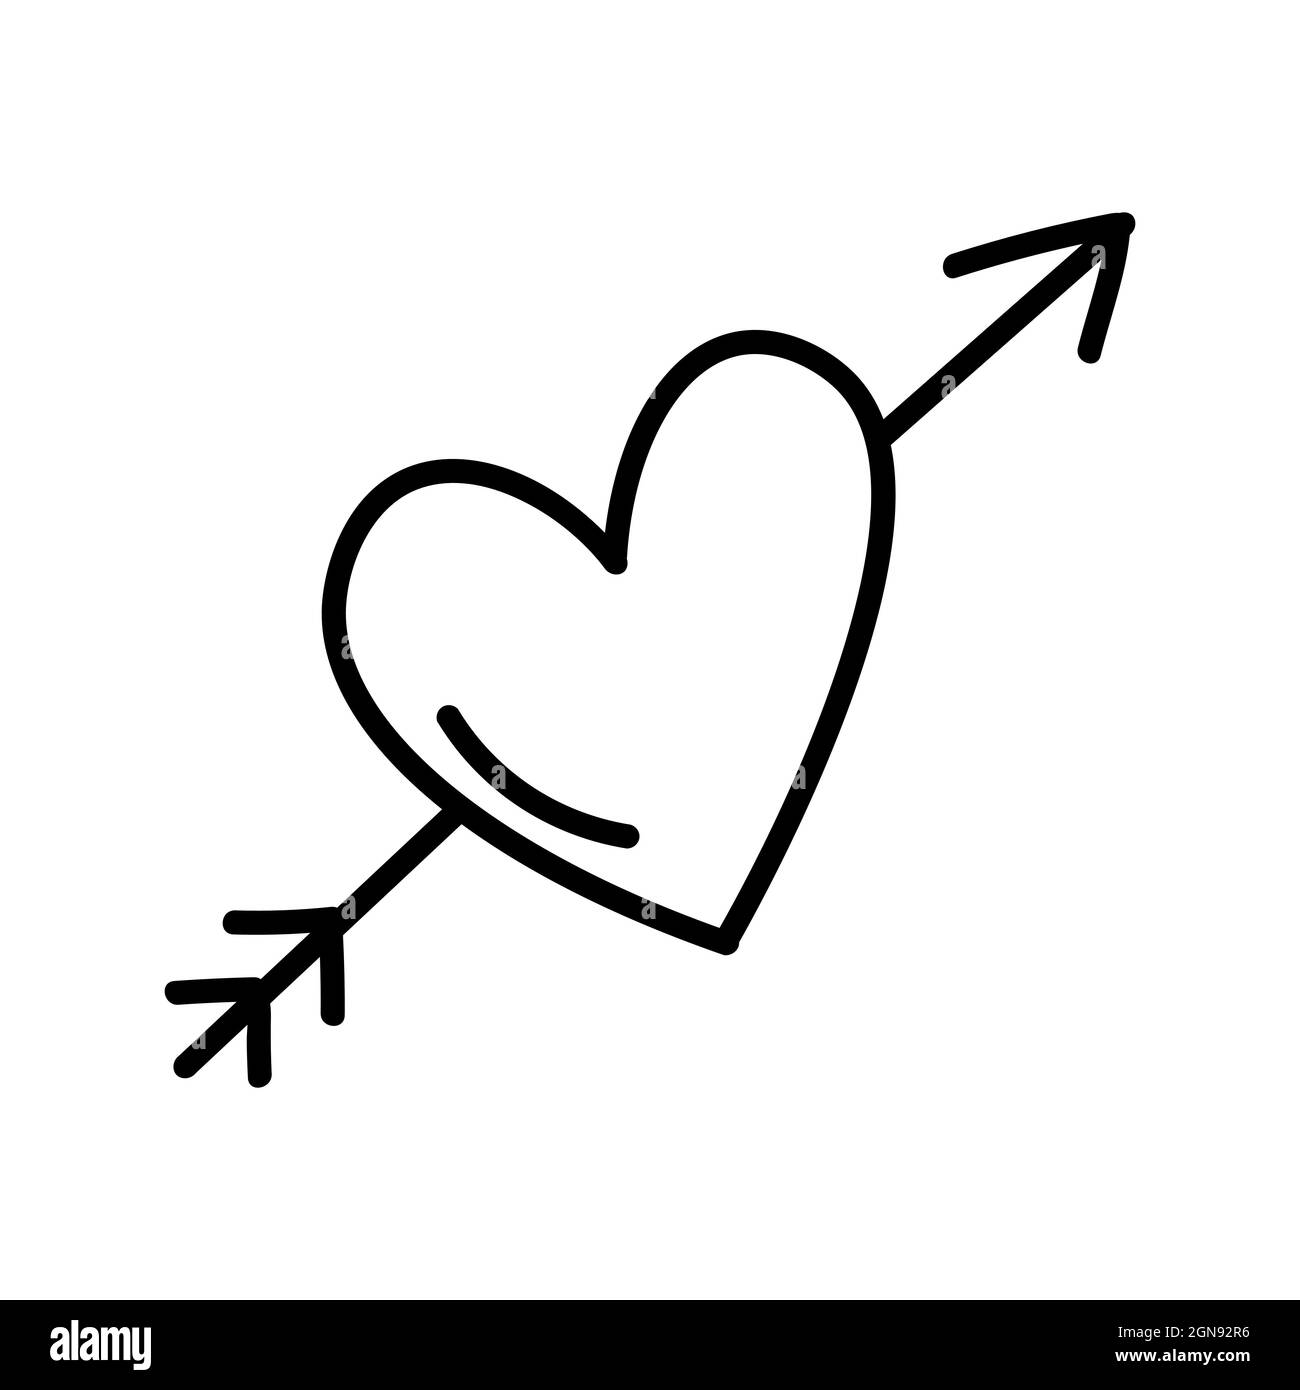 Heart with arrow tattoo Black and White Stock Photos & Images - Alamy